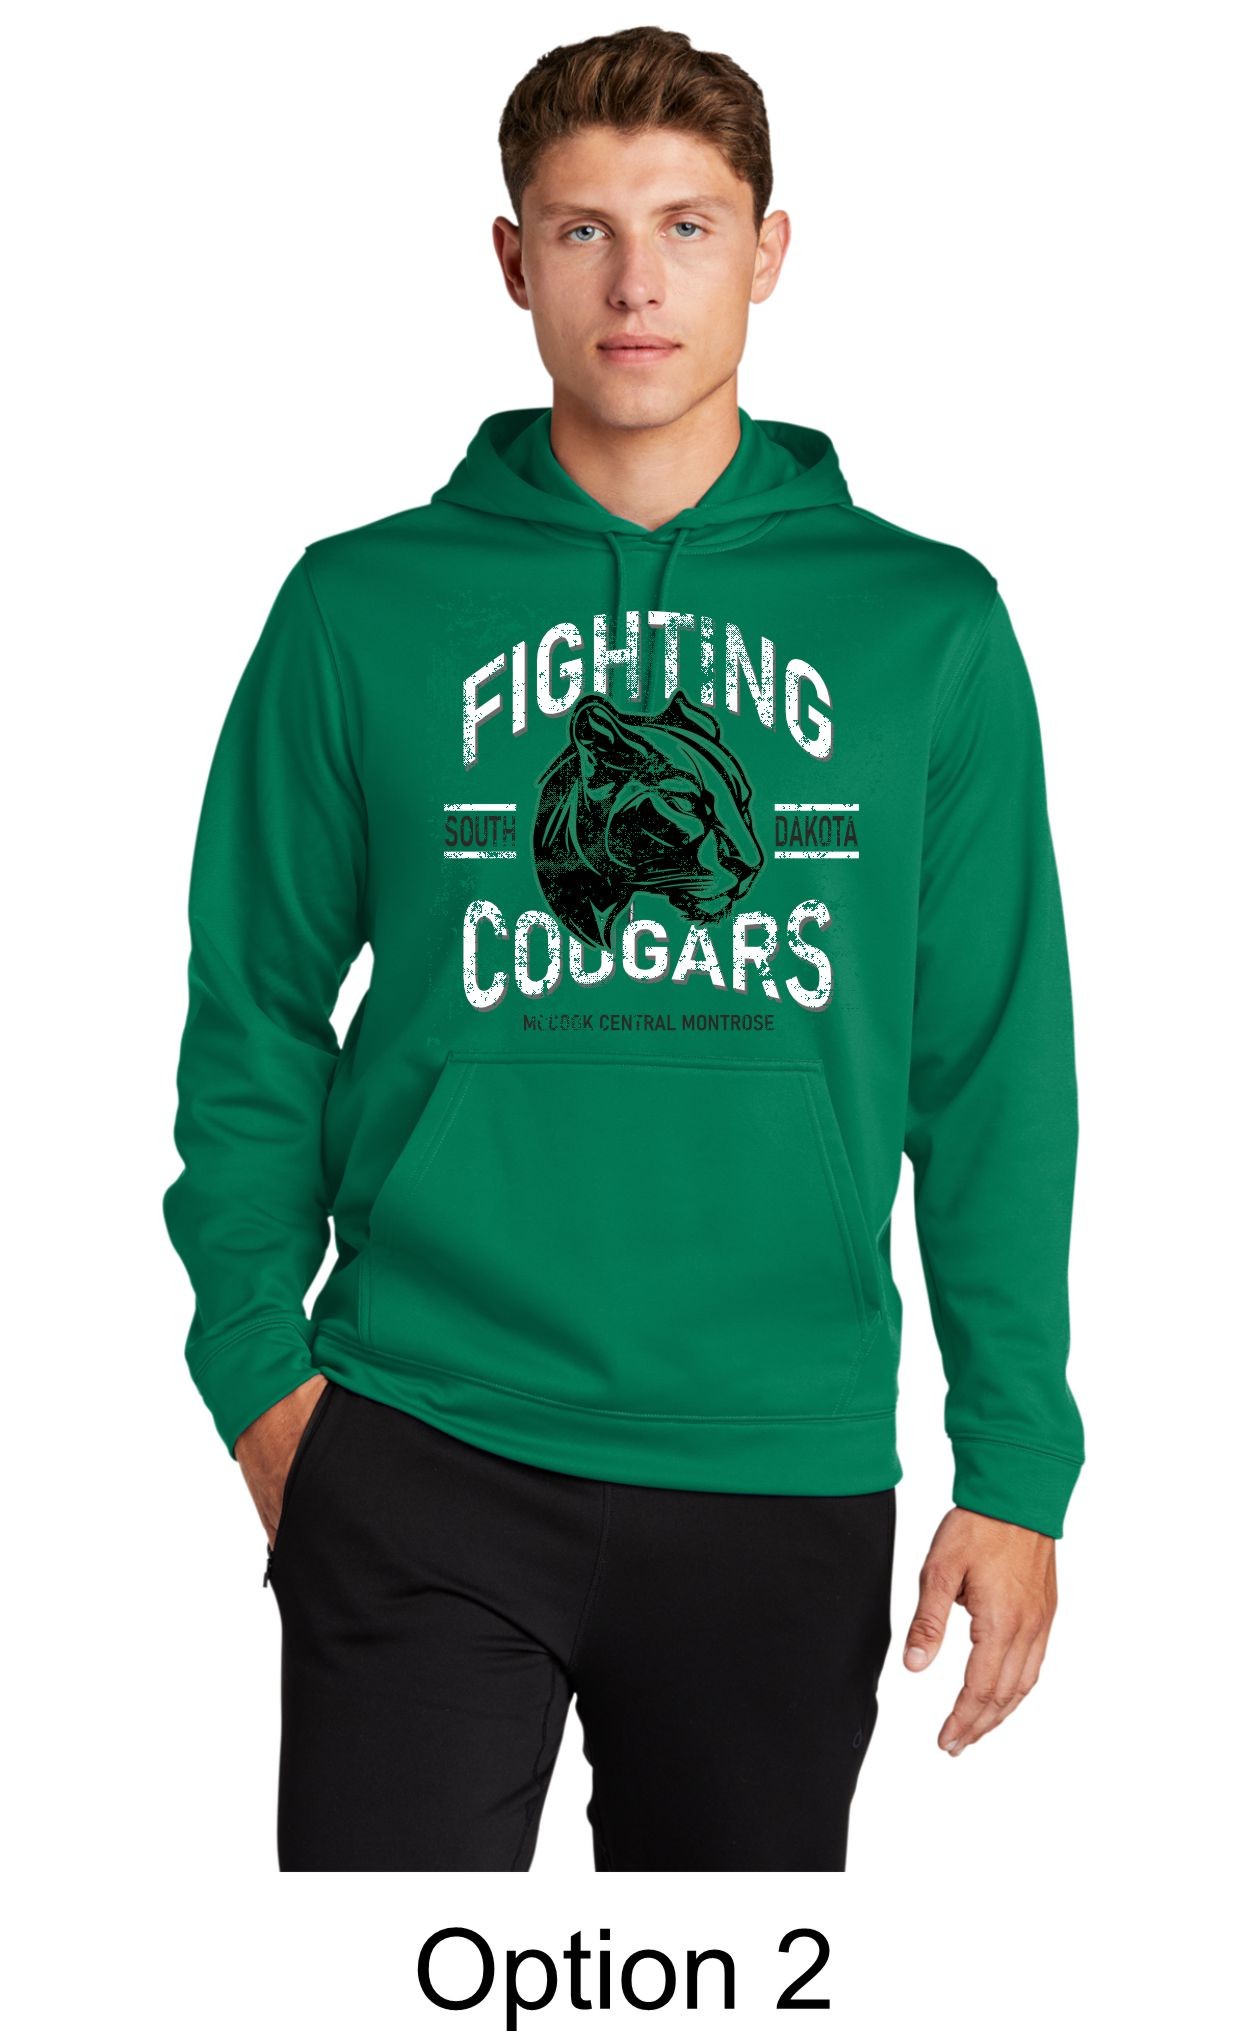 MCM Fighting Cougars Customizable Dri-Fit Hoodie - Kelly Green